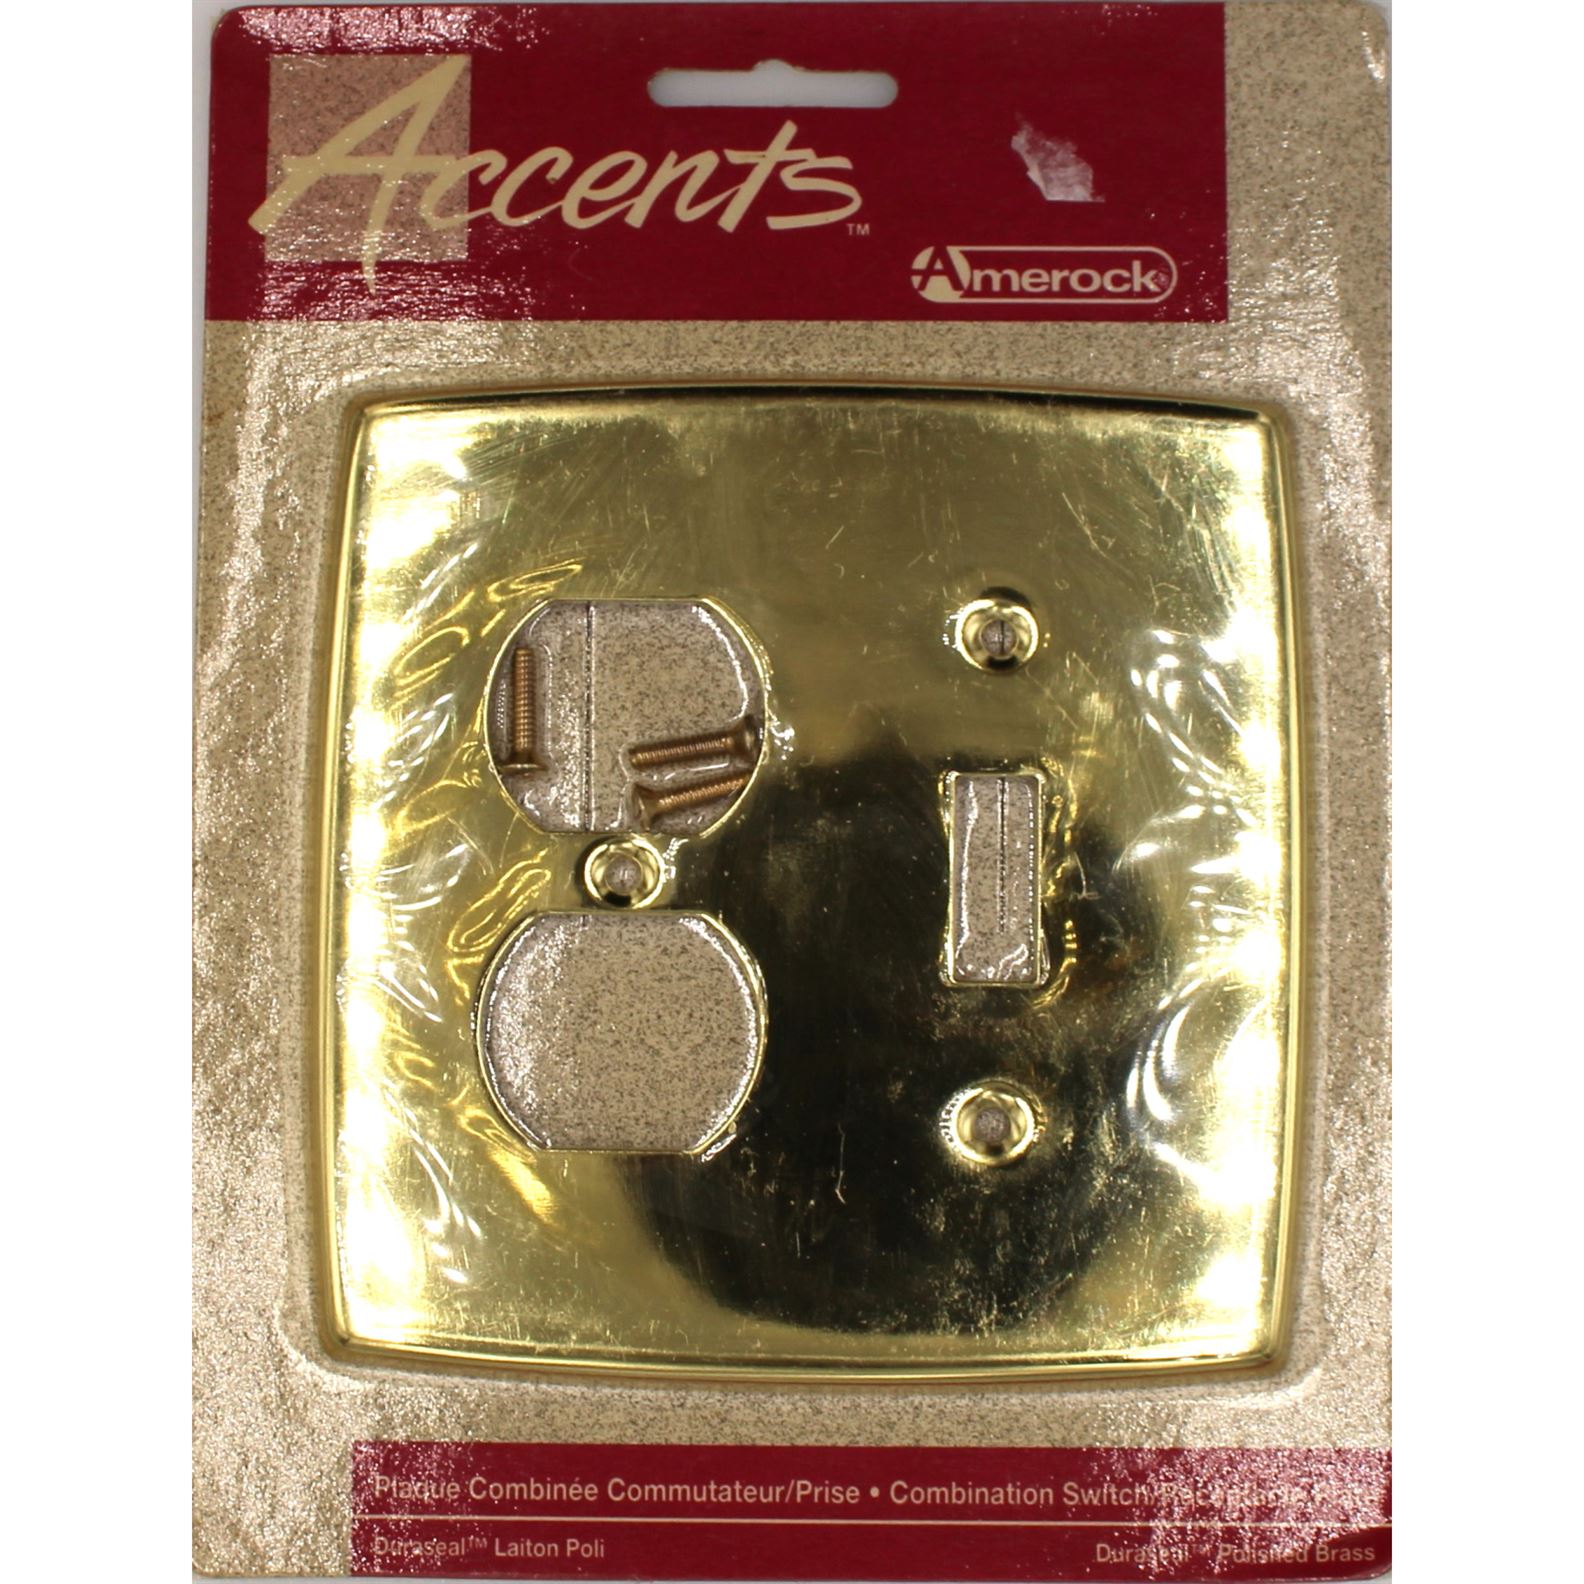 Amerock Accents Polished Brass Light Switch / Receptacle Wall Plate 52163